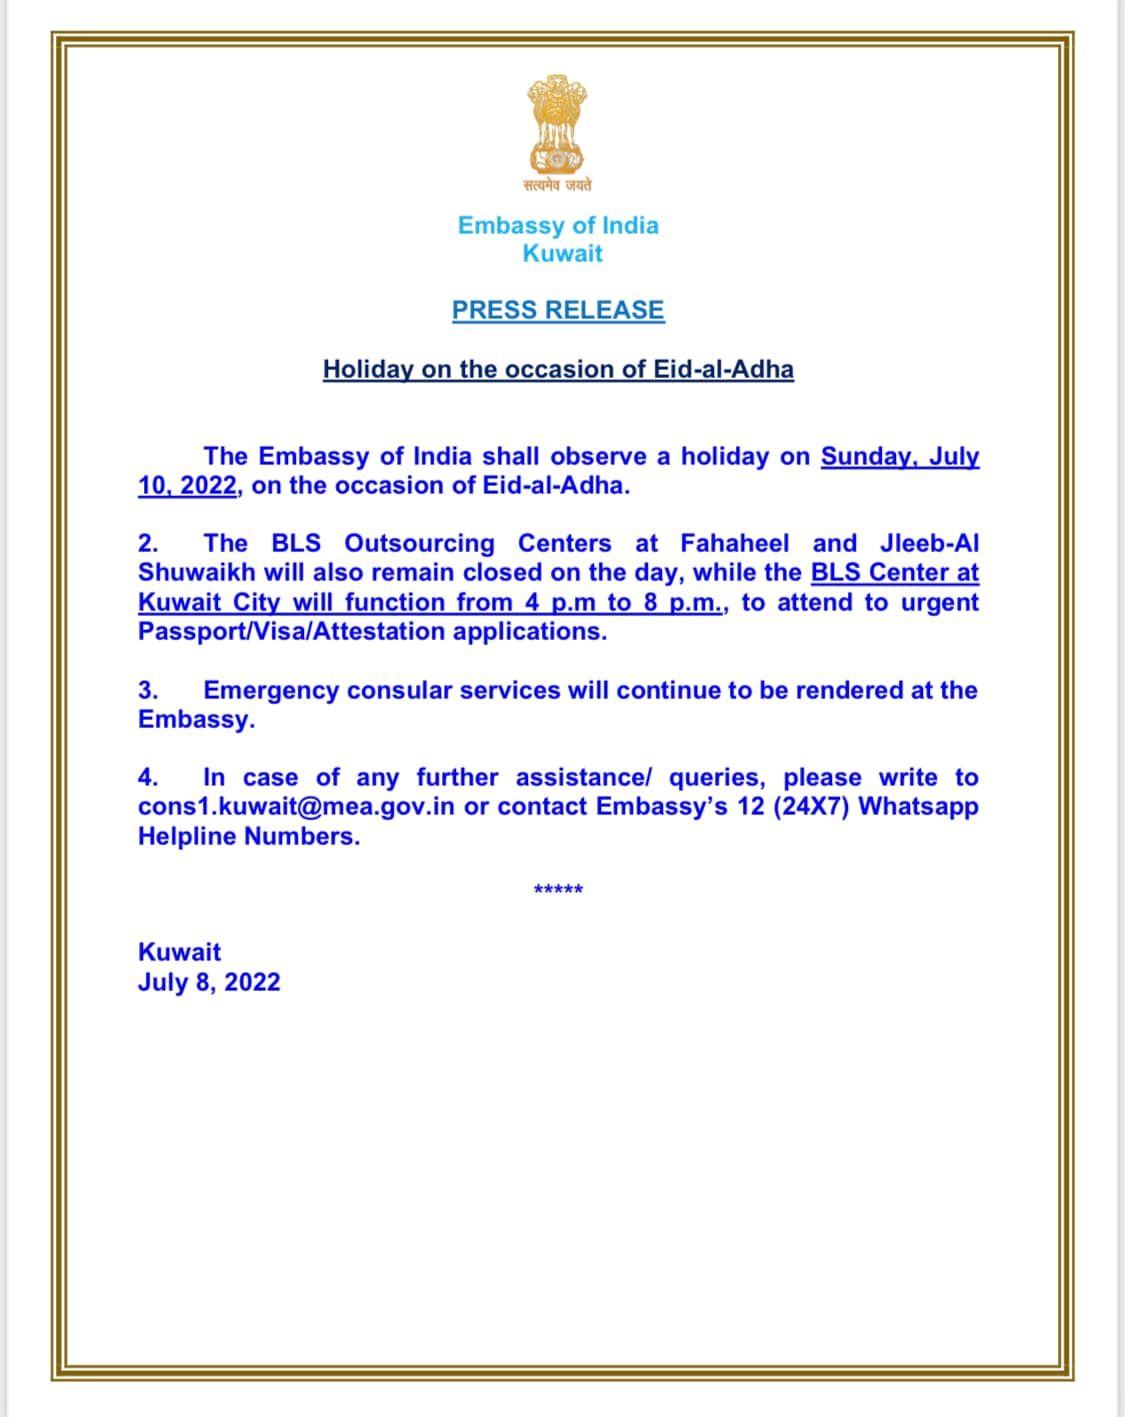 Indian Embassy Holiday on the occasion of Eid-al-Adha 2022